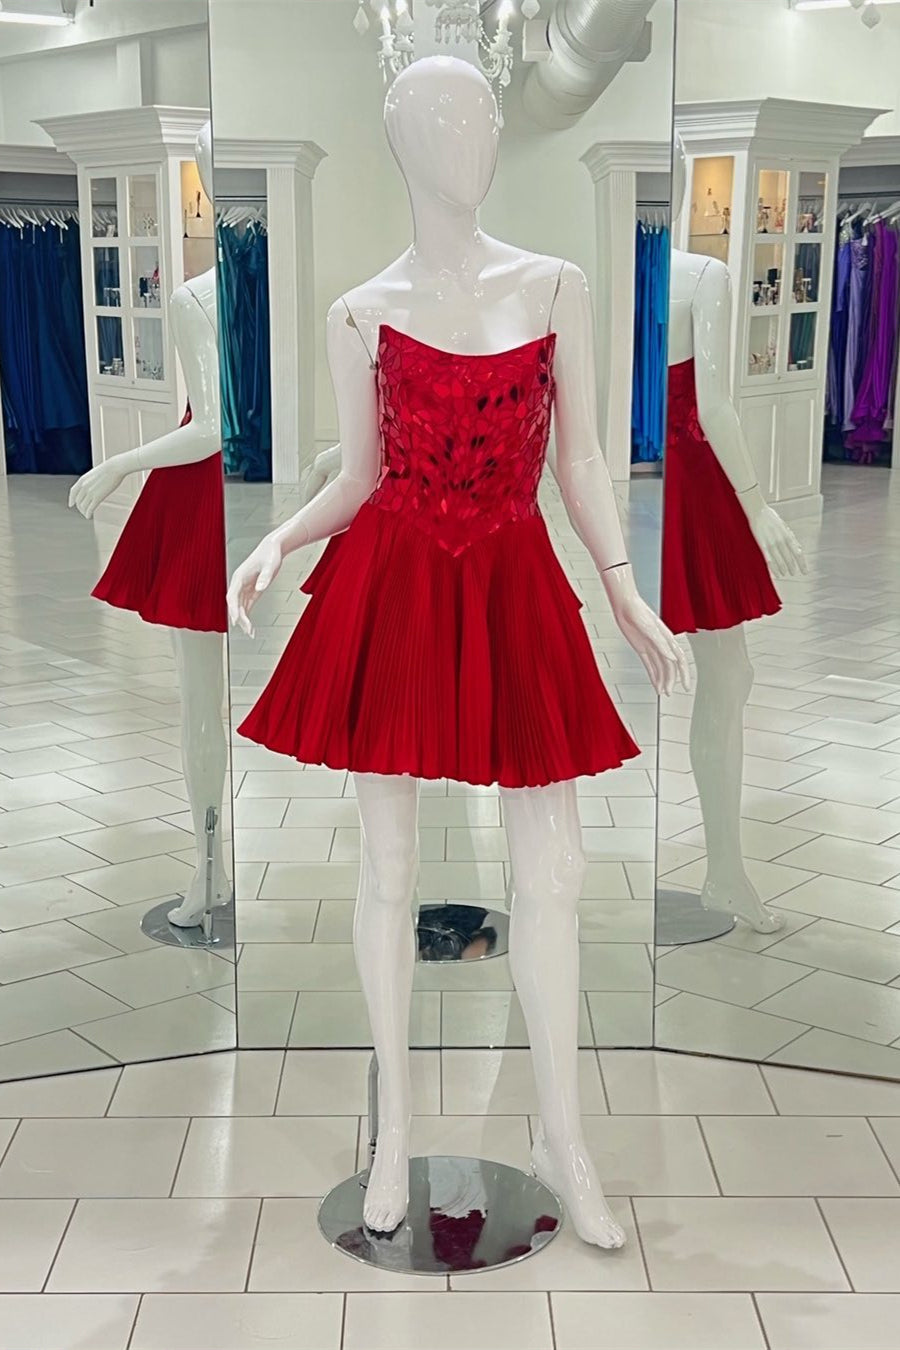 Red Strapless Mirror-Cut Sequins Top A-line Corset Homecoming Dress outfit, Bridesmaid Dresses Chicago